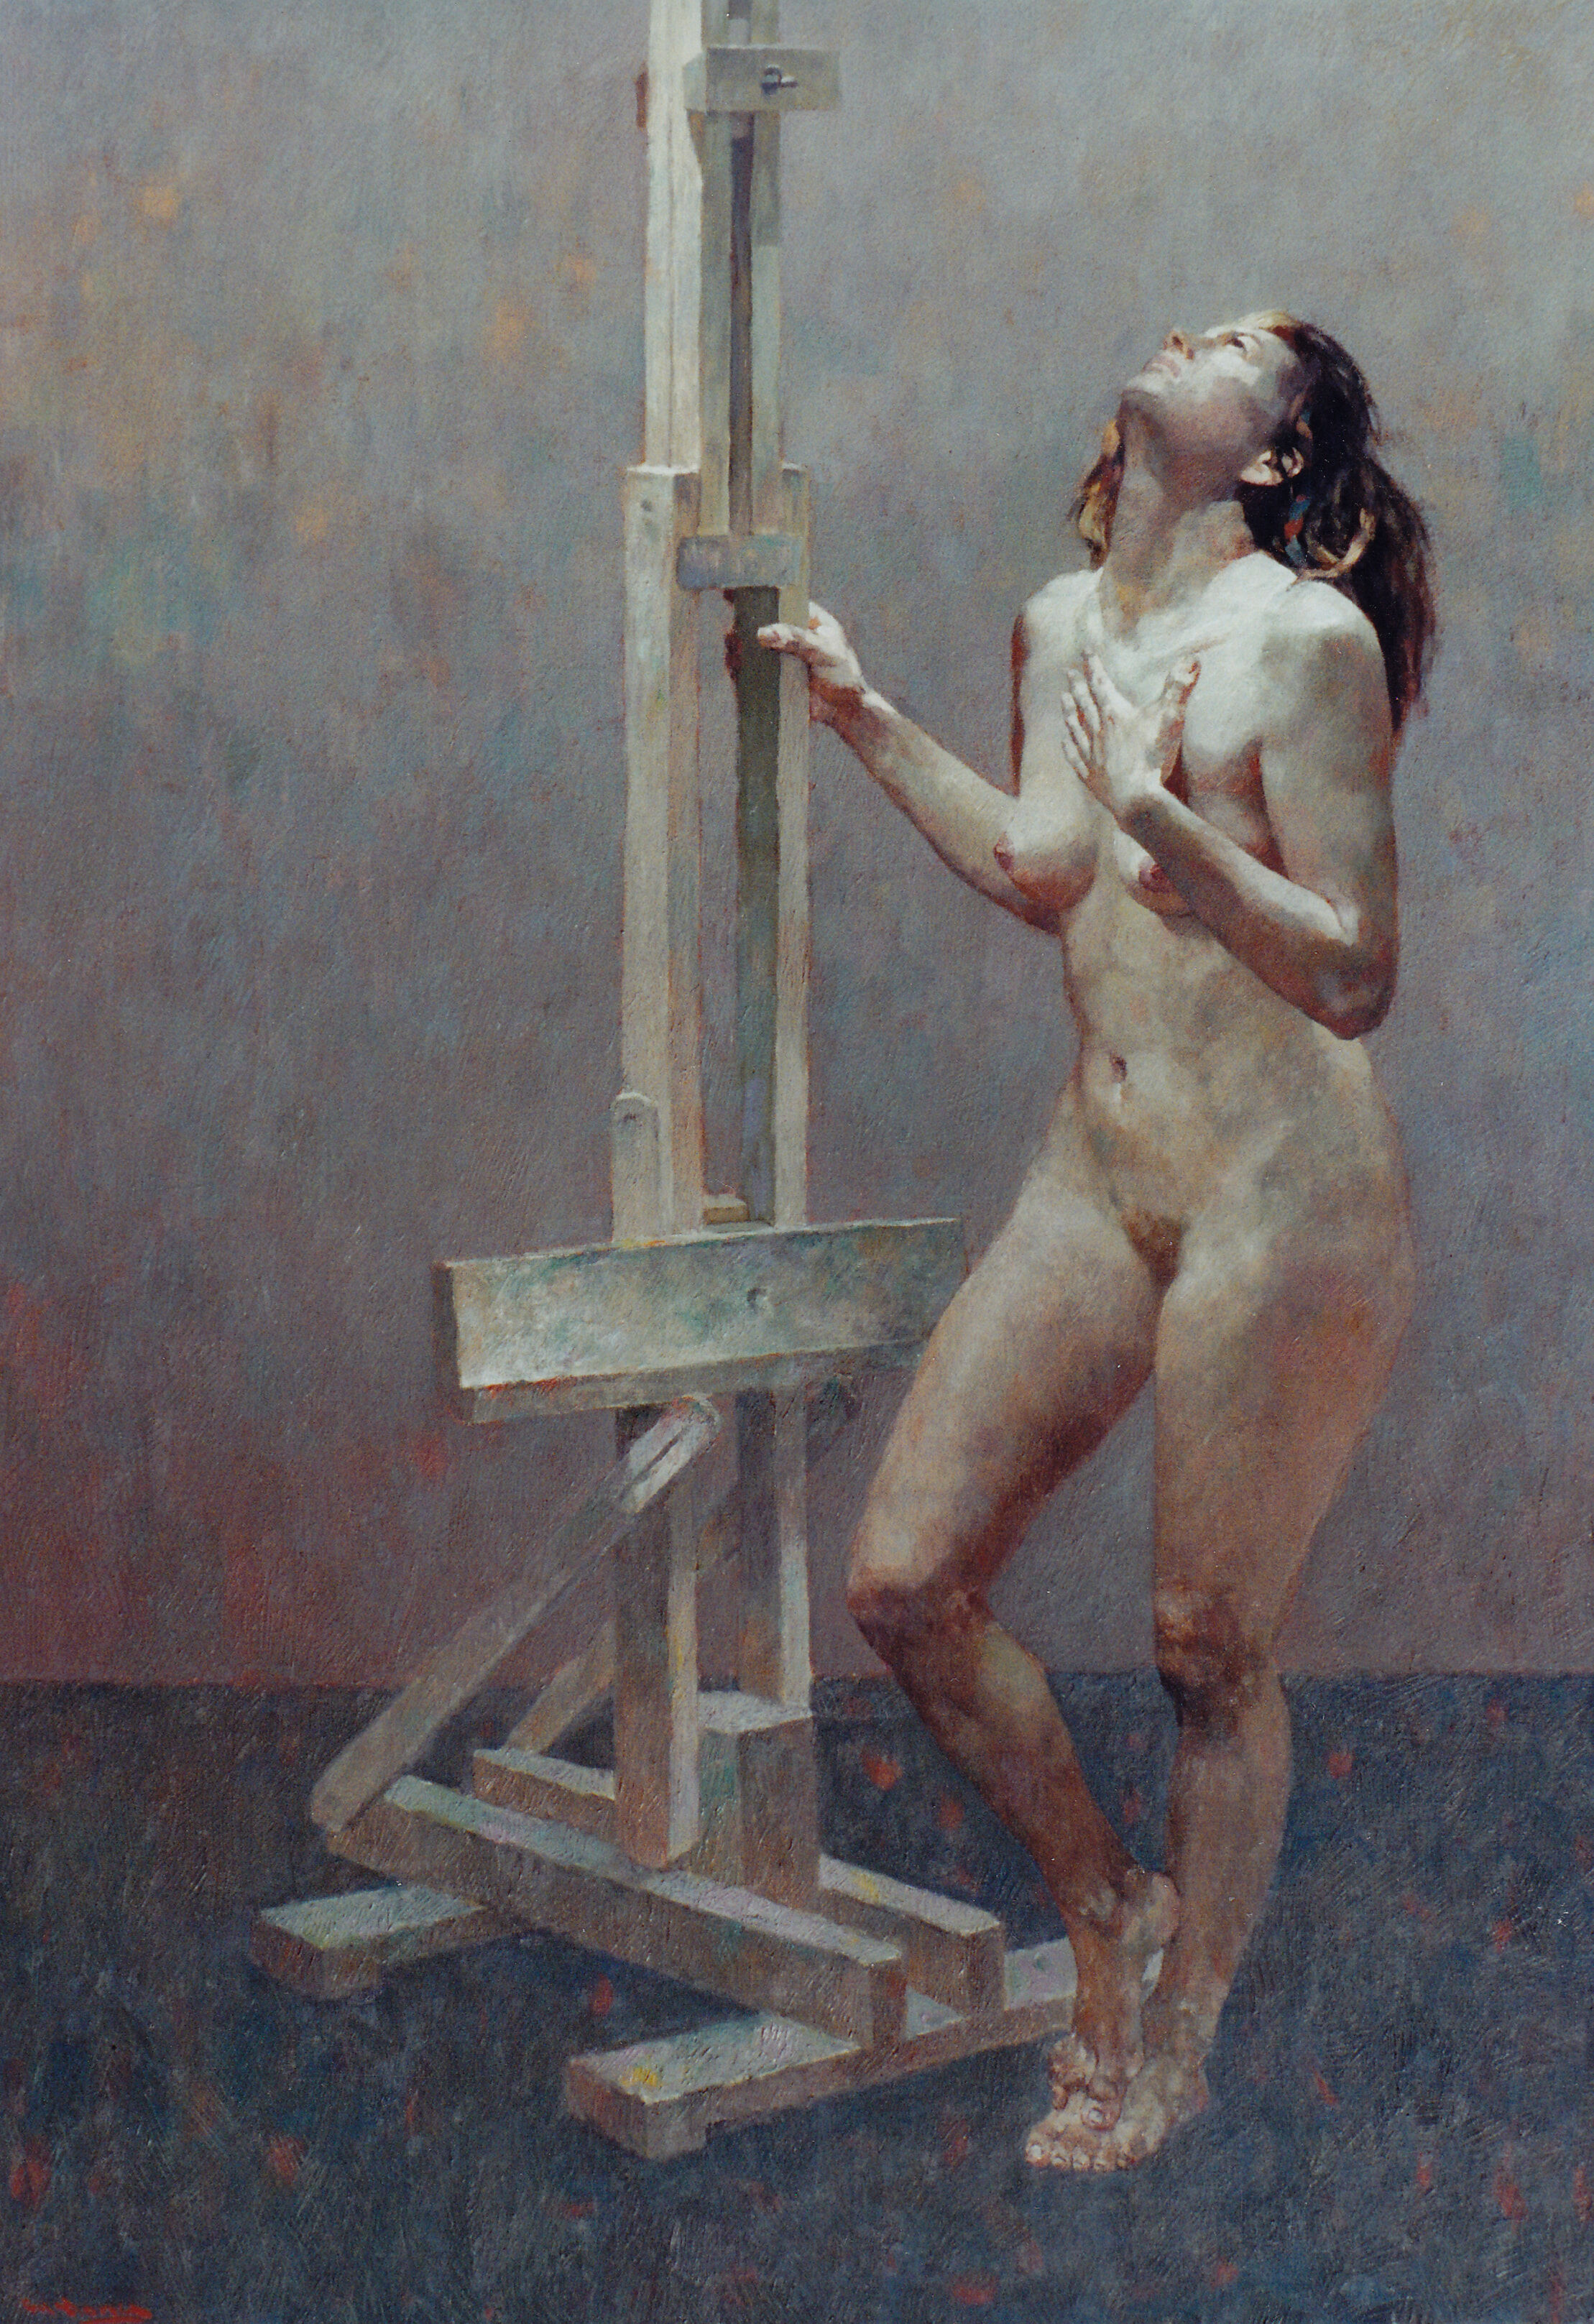 Nude and easel - 165 x 115cm - oil on canvas - Hong Fu